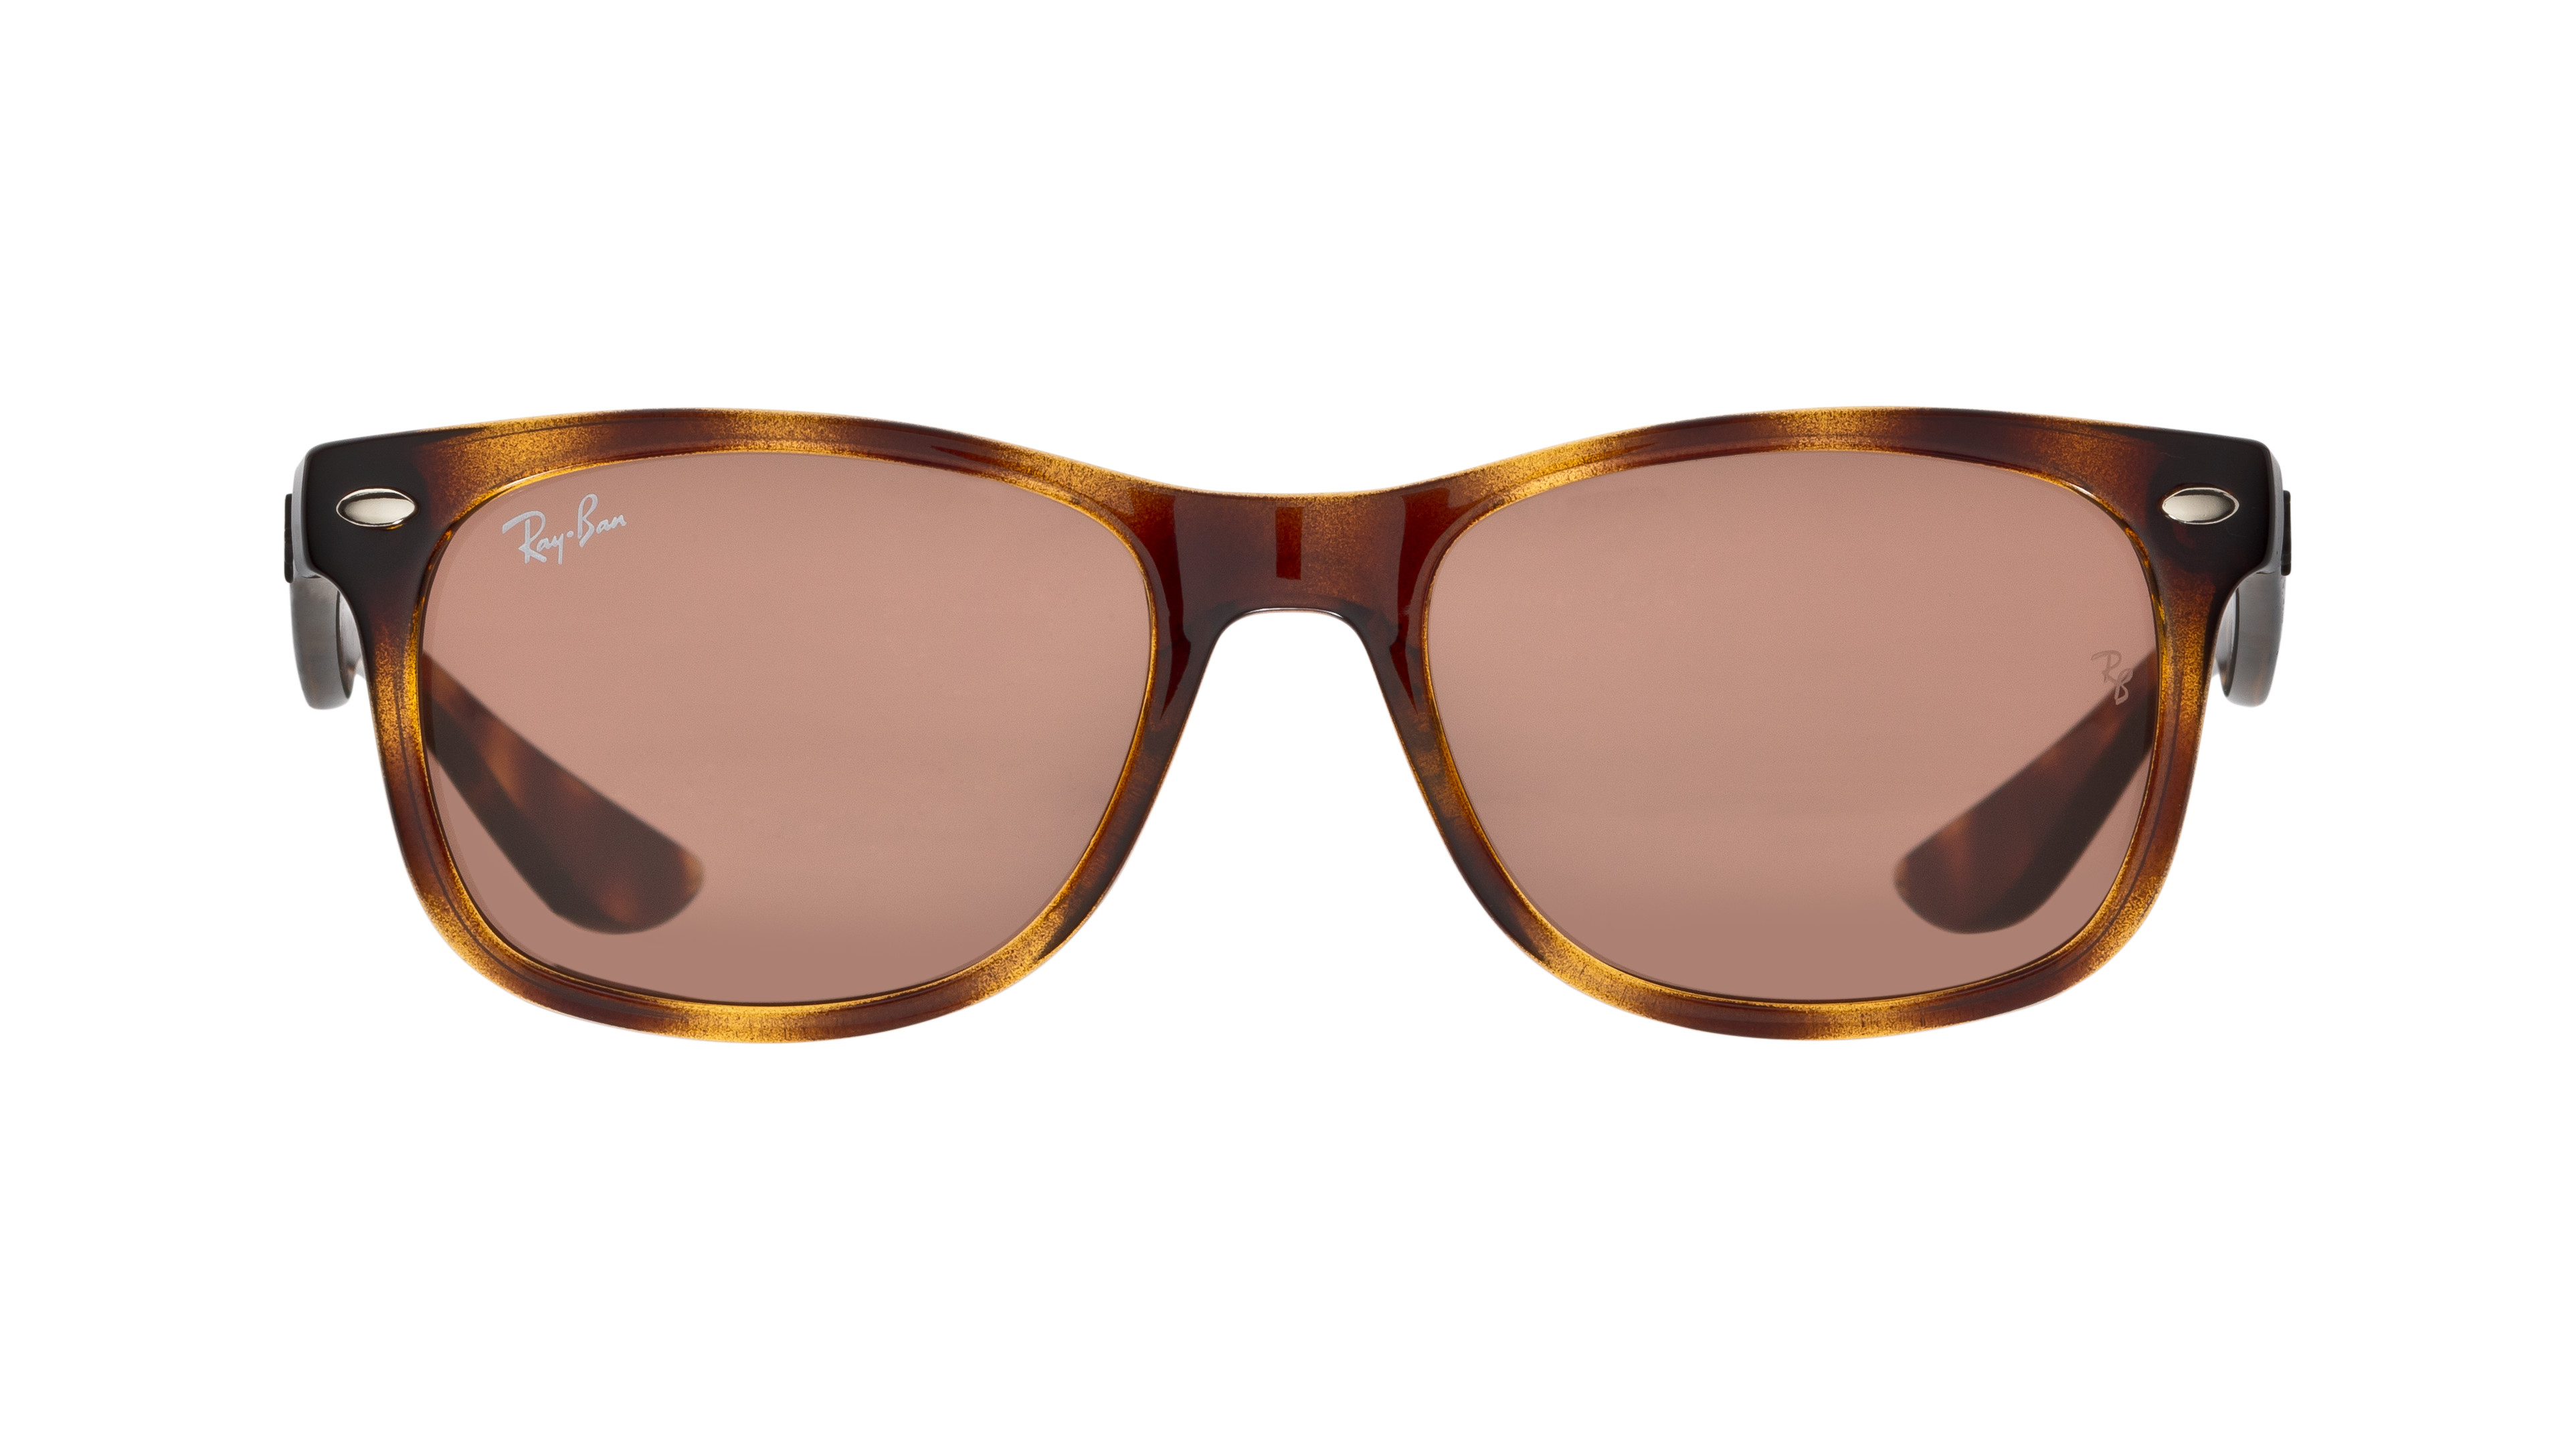 [products.image.front] Ray-Ban JUNIOR NEW WAYFARER 0RJ9052S 152/73 Sonnenbrille